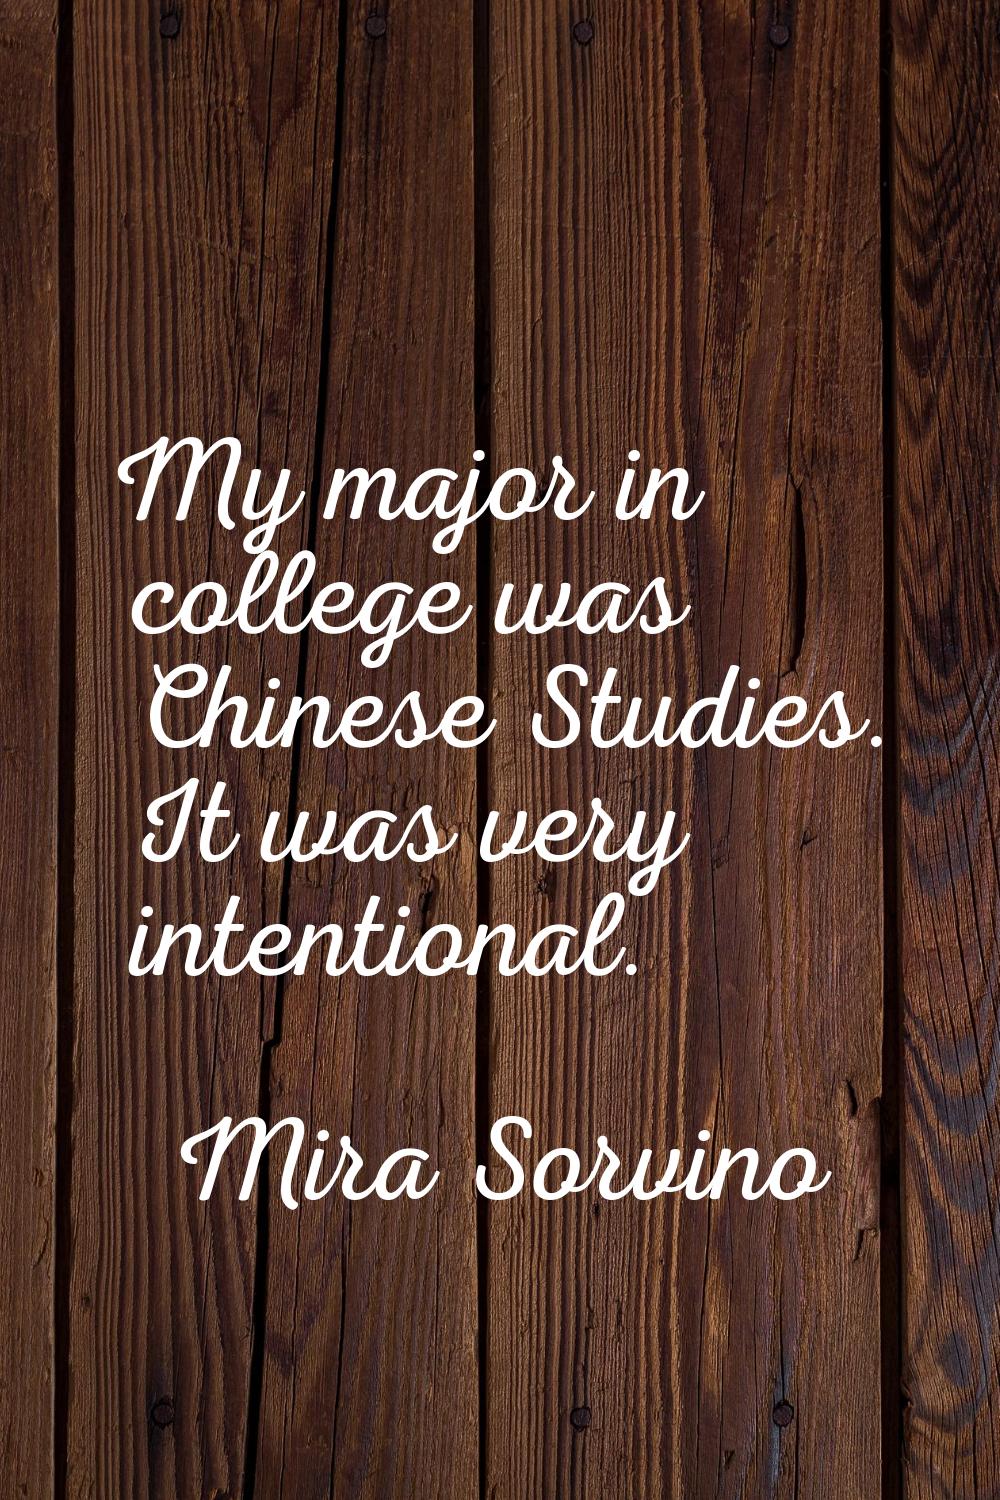 My major in college was Chinese Studies. It was very intentional.